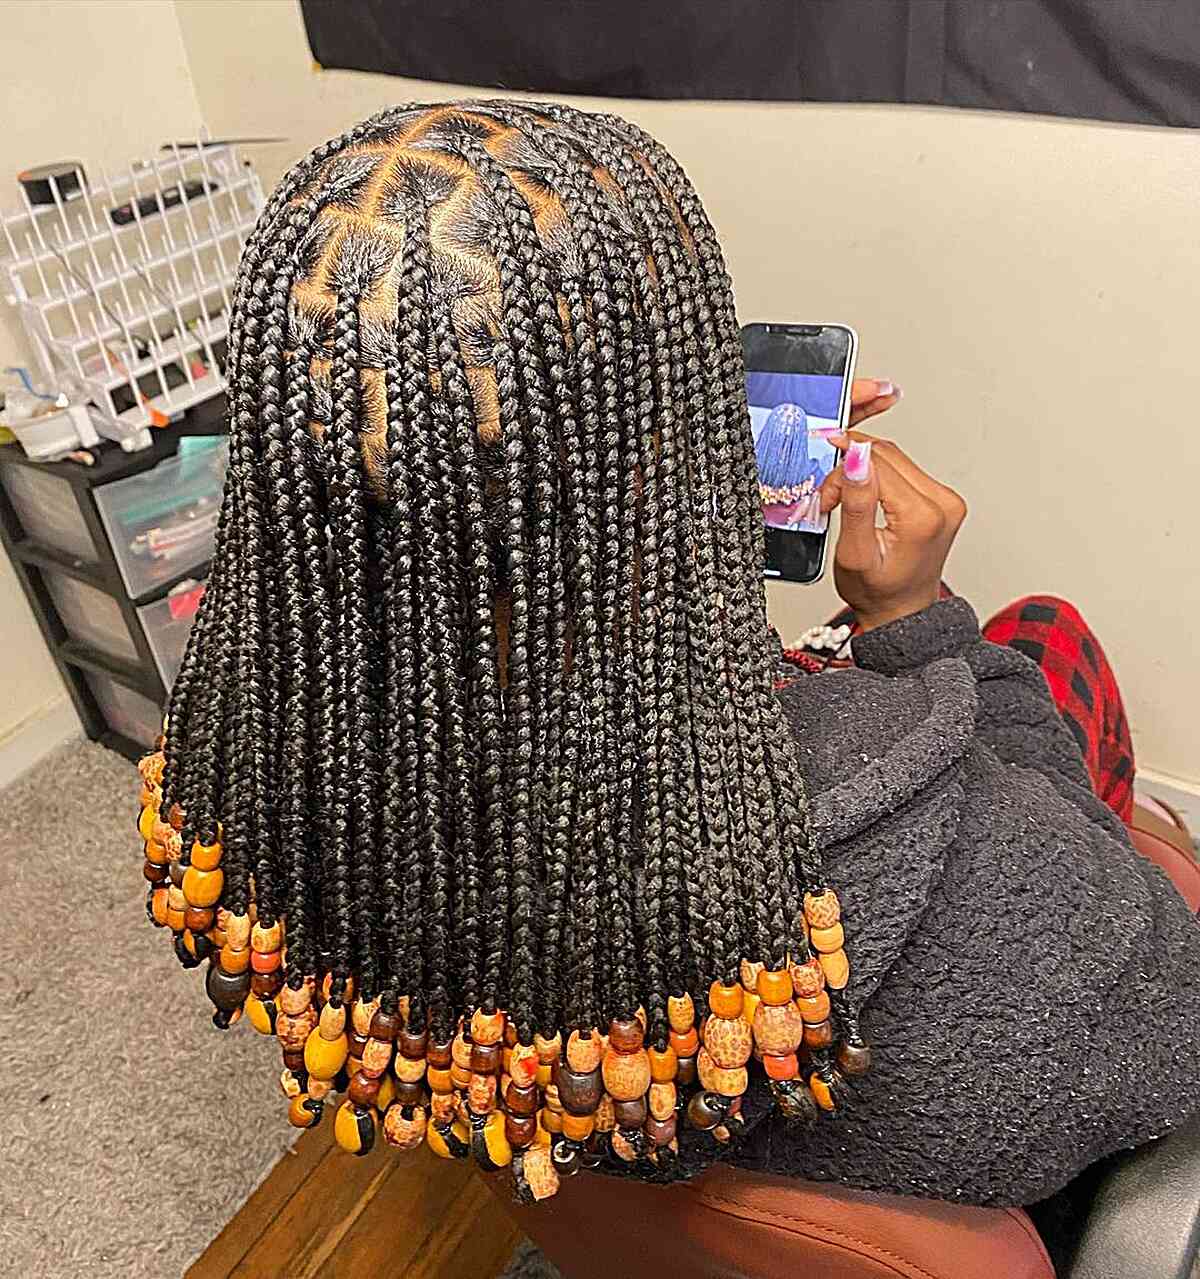 Shoulder-Length Black Knotless Braids with Orange Beads for Thick Hair